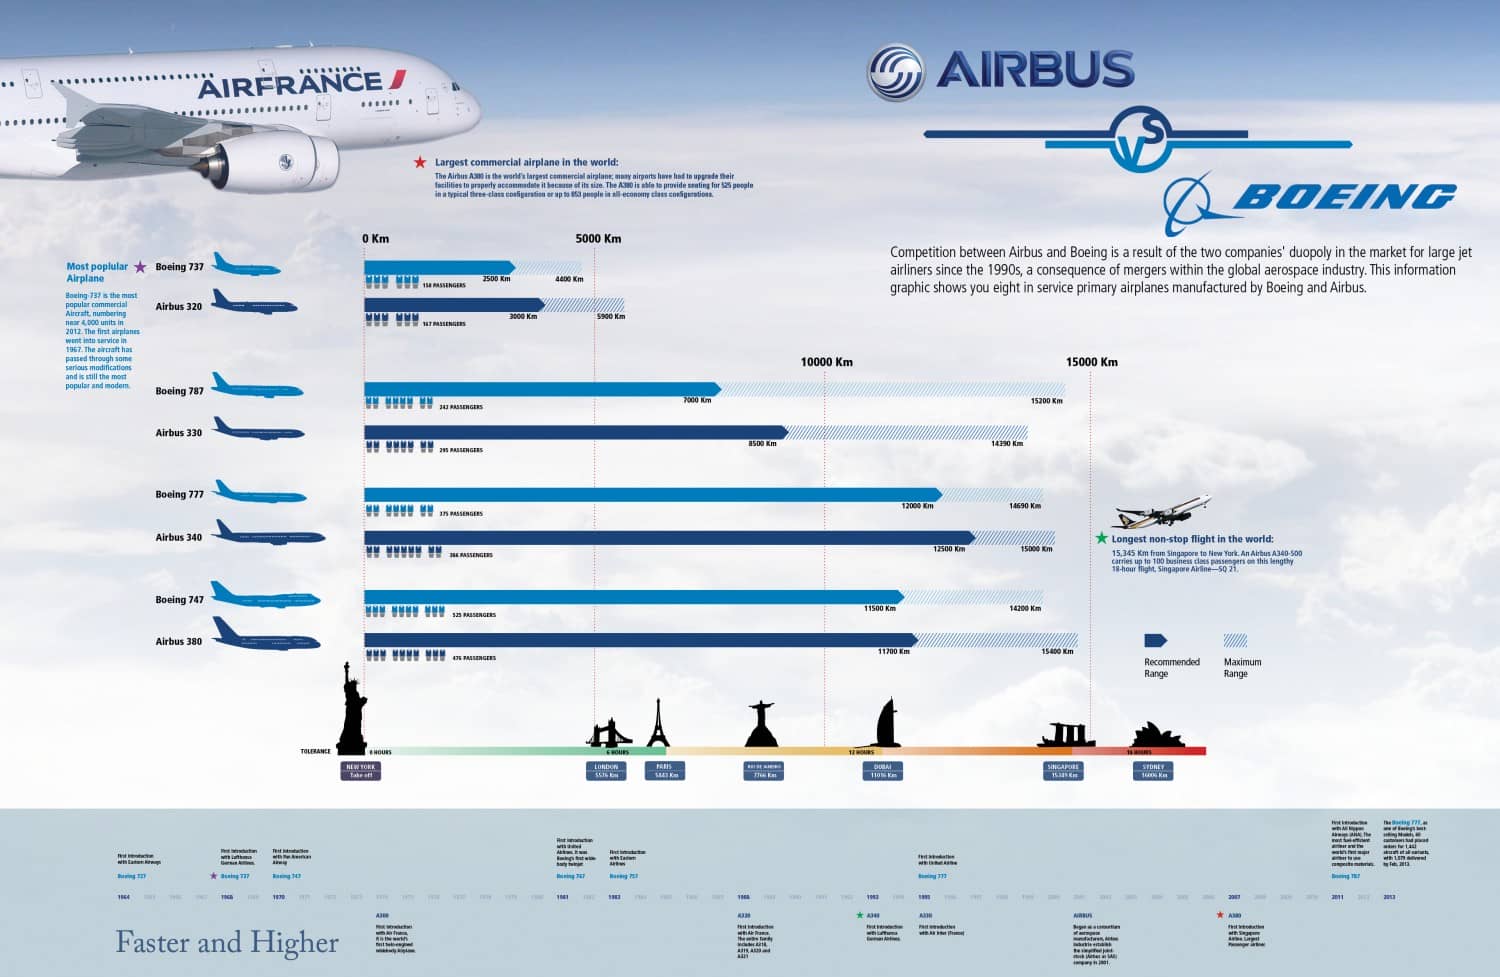 These Are The Major Design Differences Between Airbus And Boeing ...